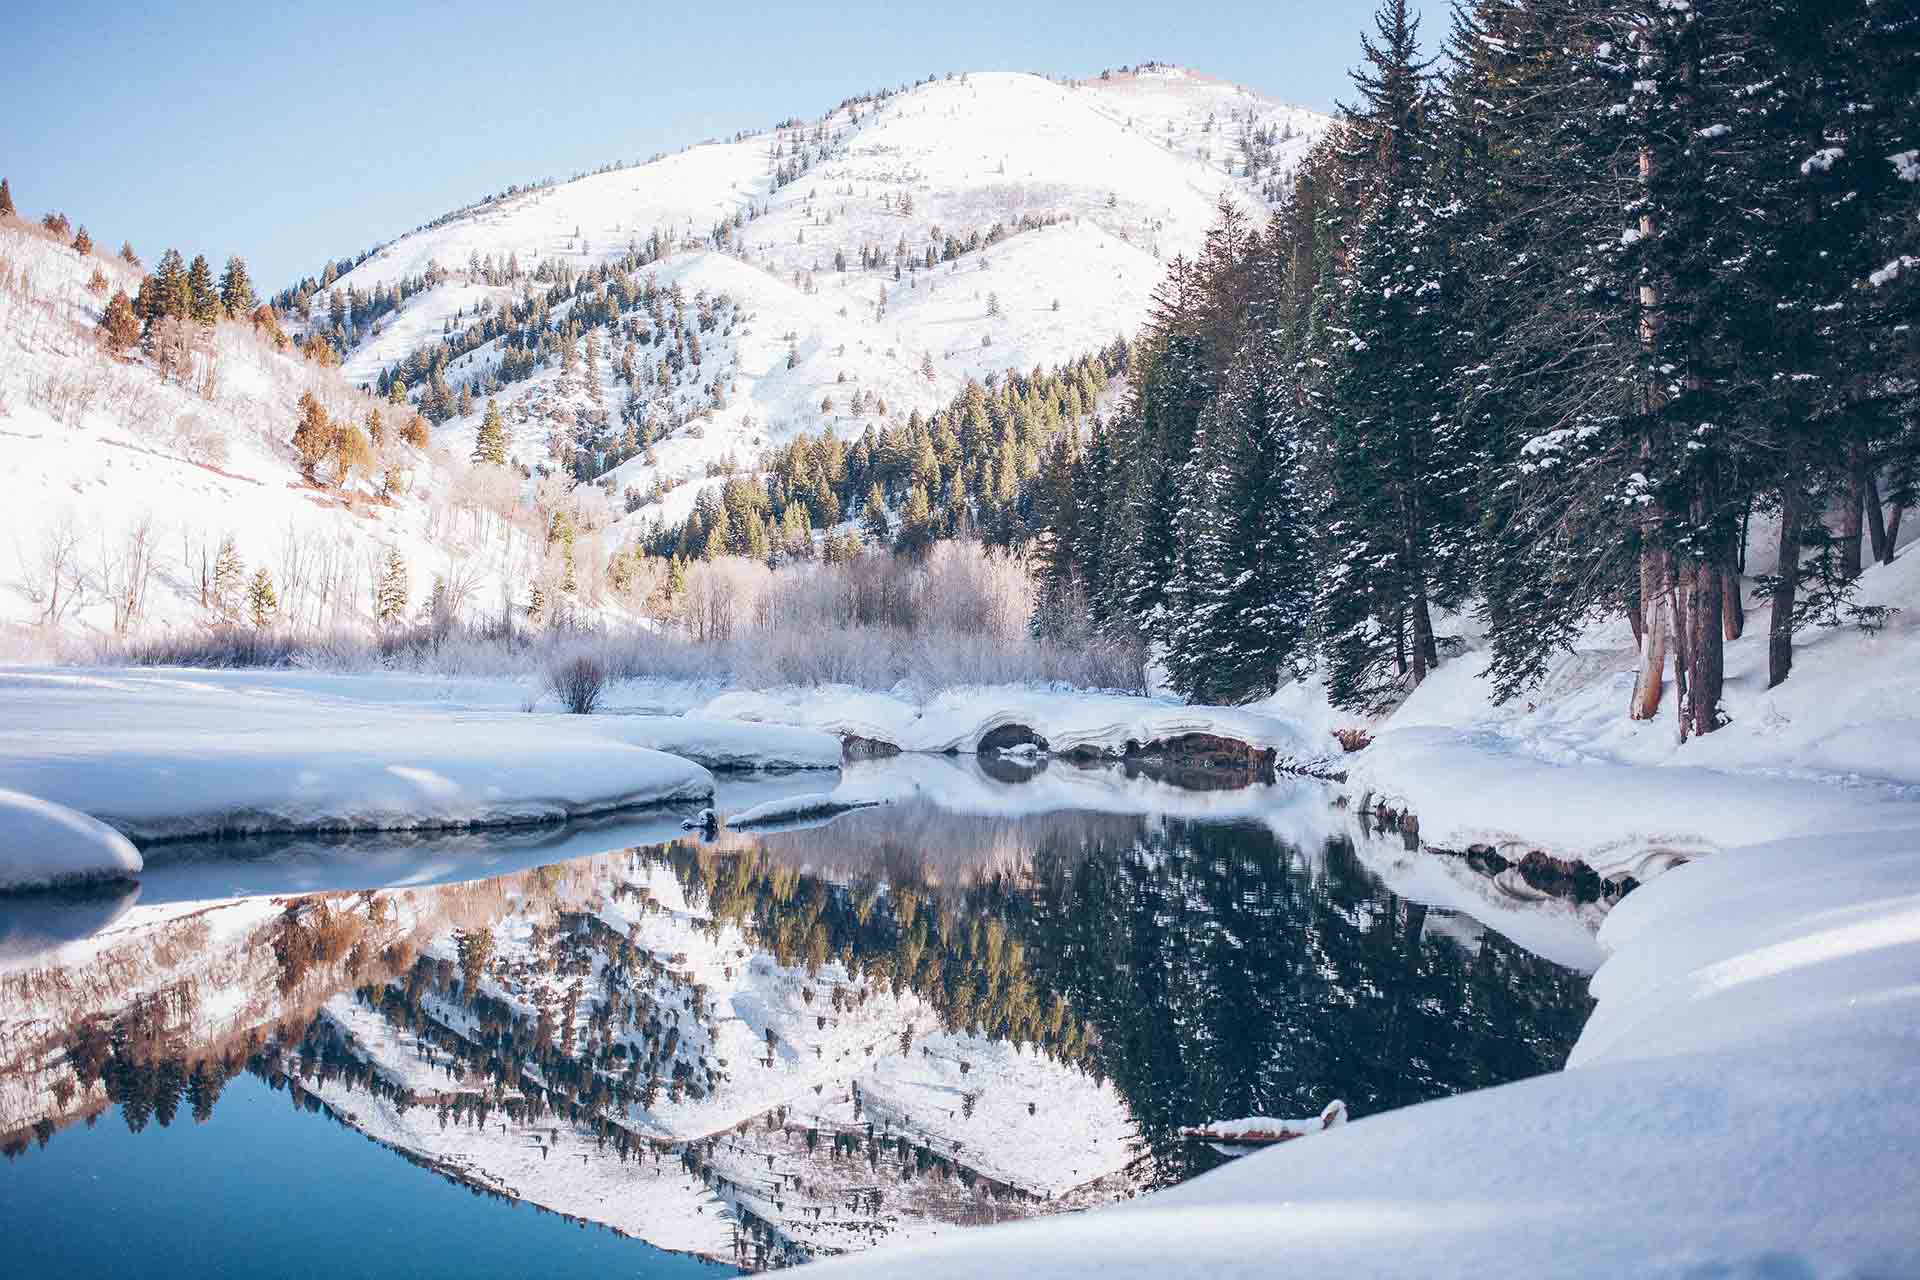 Mountains, trees, and a body of water during the winter